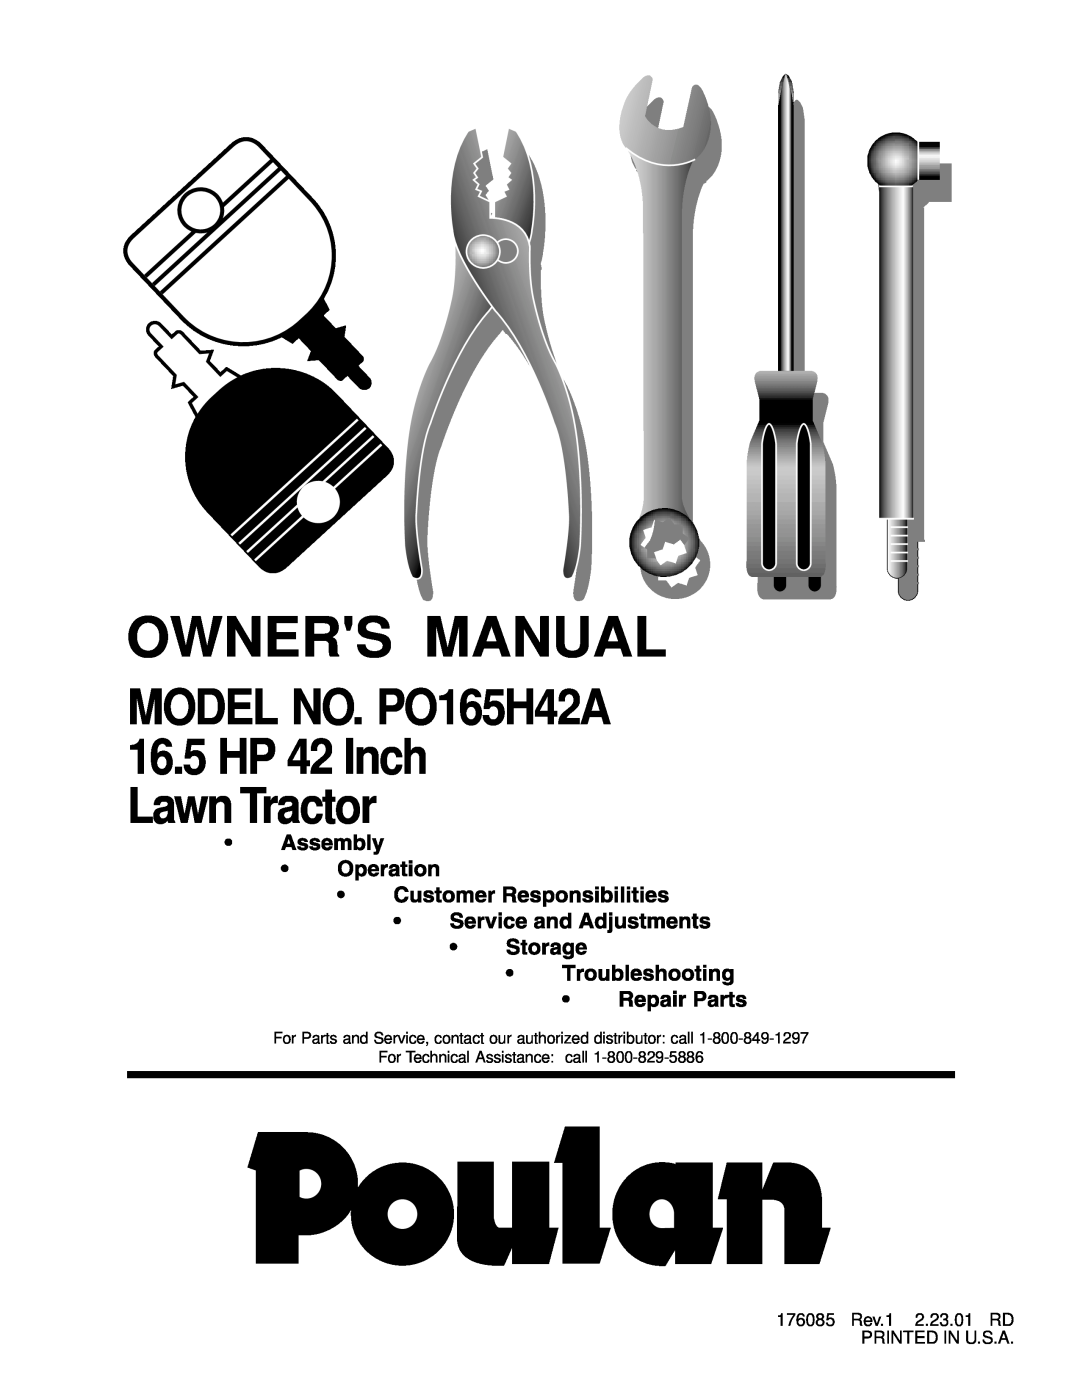 Poulan owner manual MODEL NO. PO165H42A 16.5HP 42 Inch Lawn Tractor 